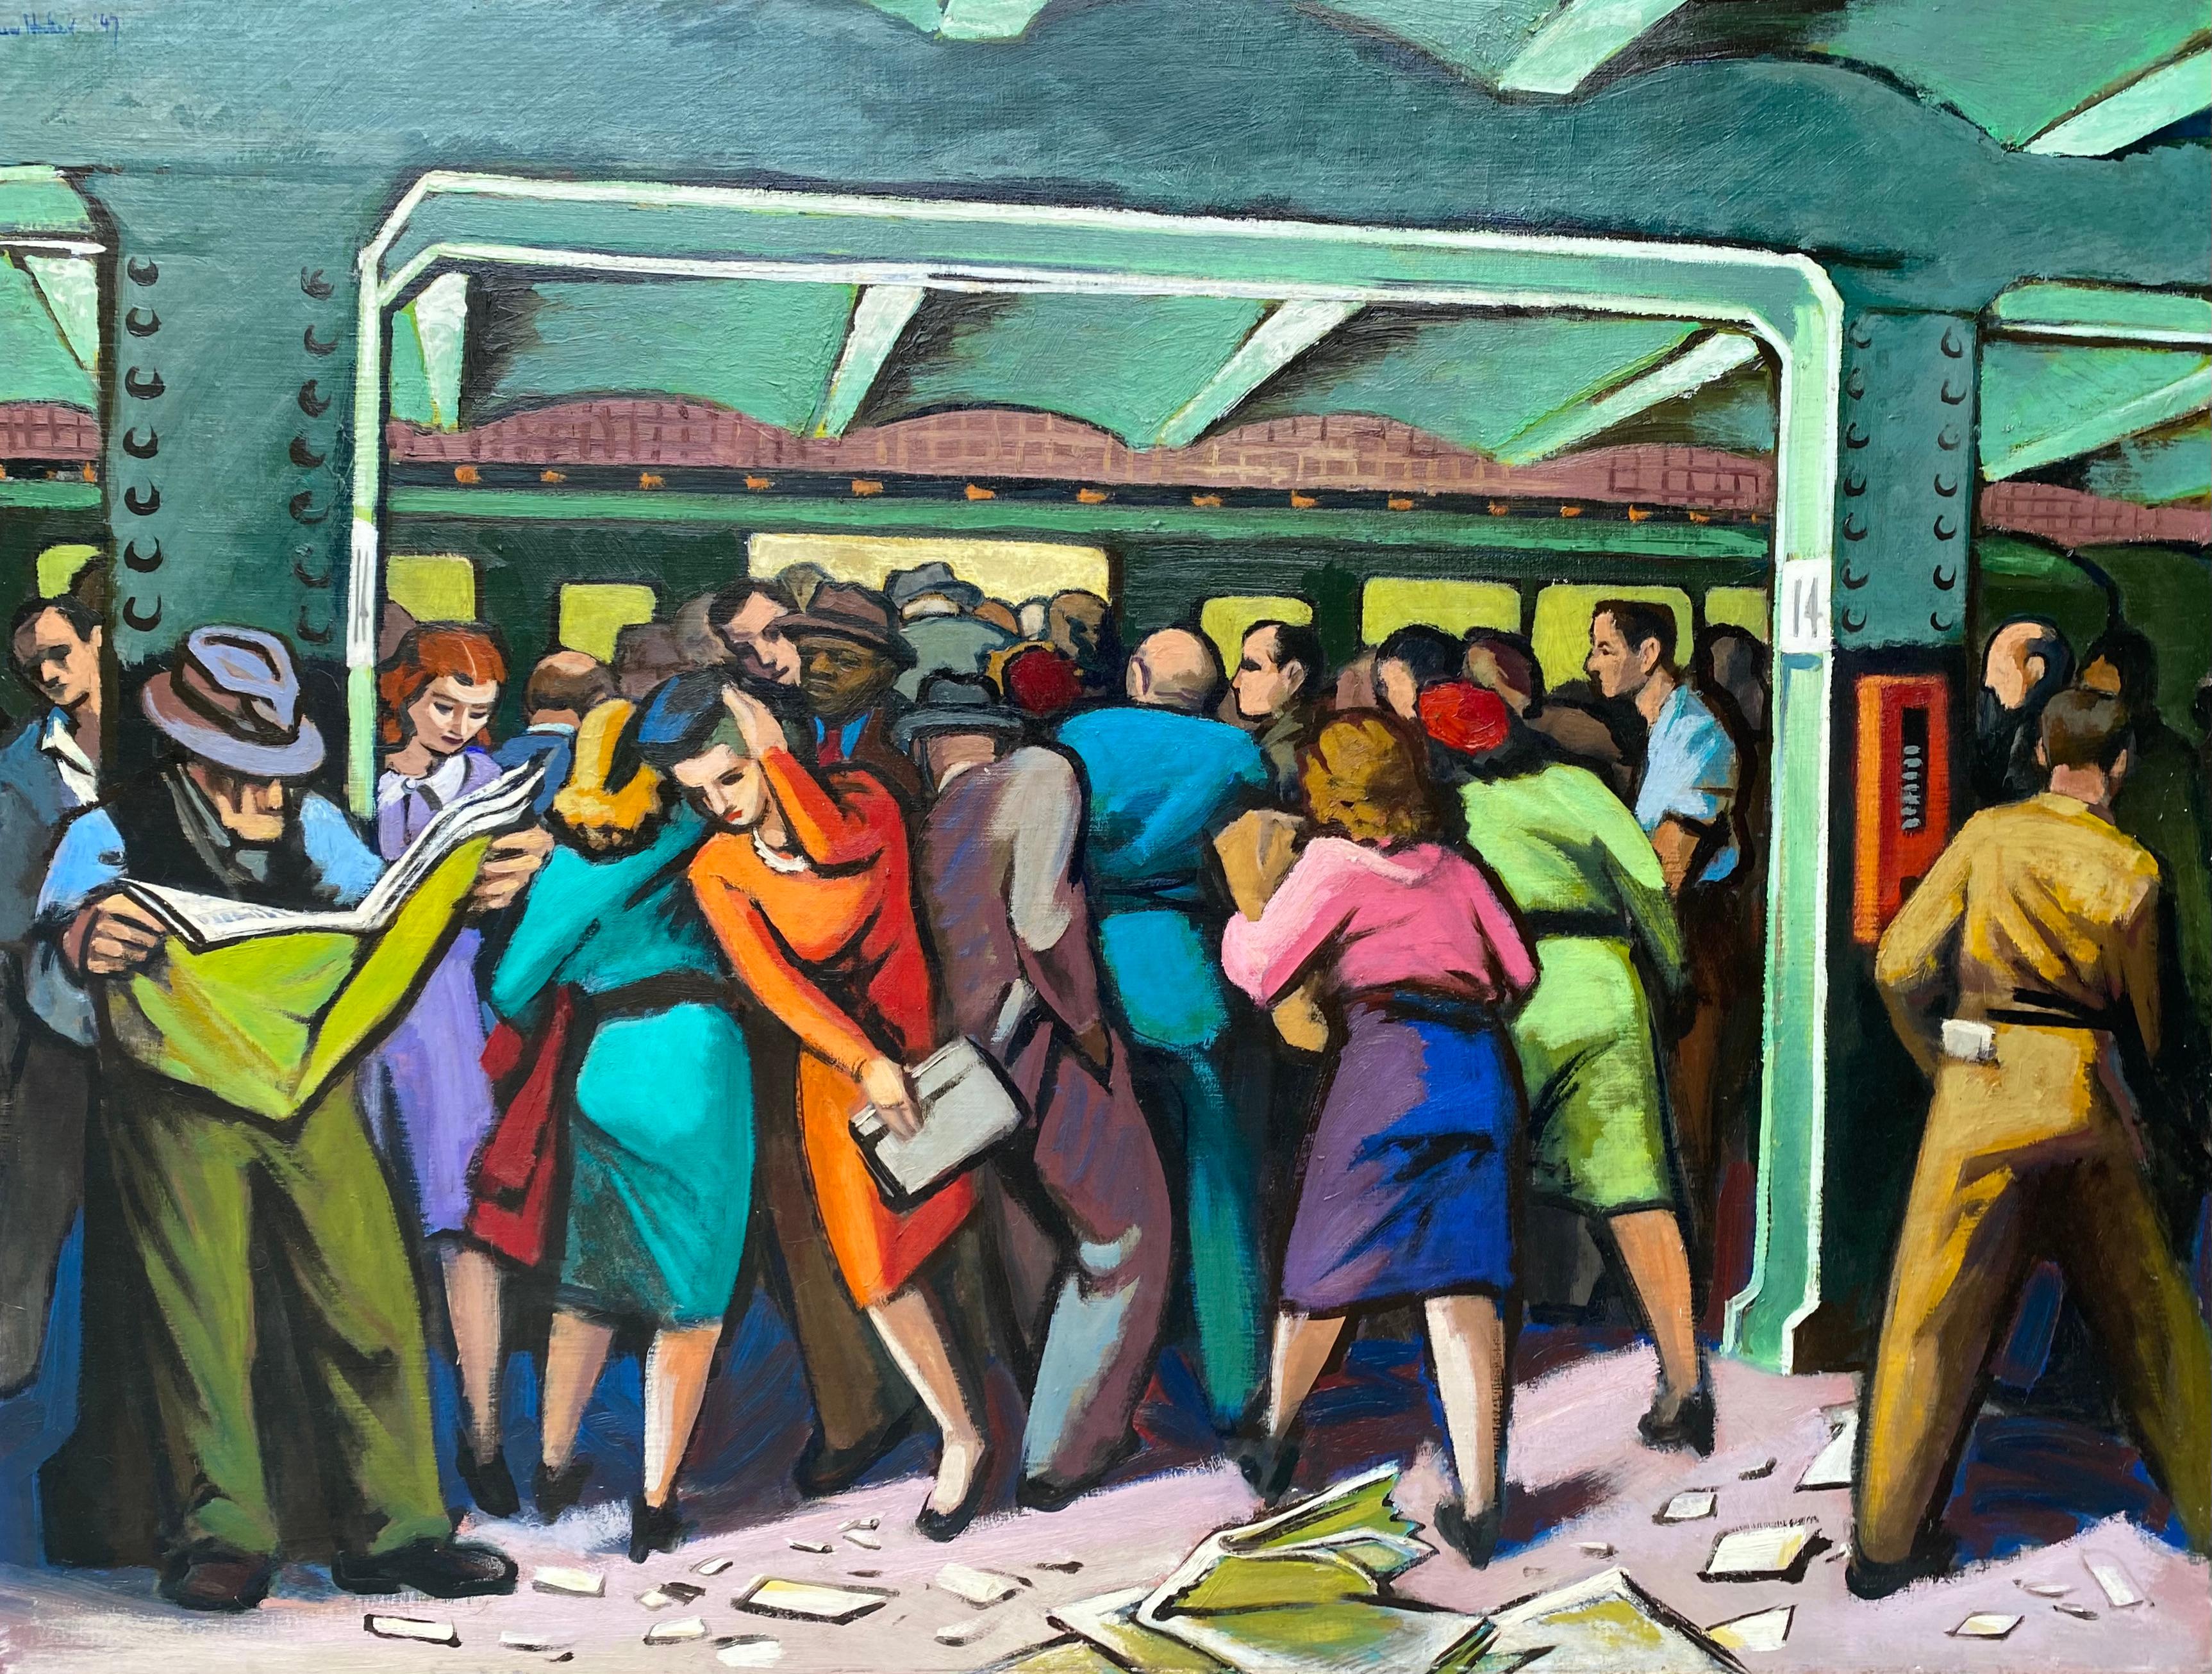 Trew Hocker Interior Painting - NYC Subway Mid 20th Century American Modernism WPA Realism industrial Colorful